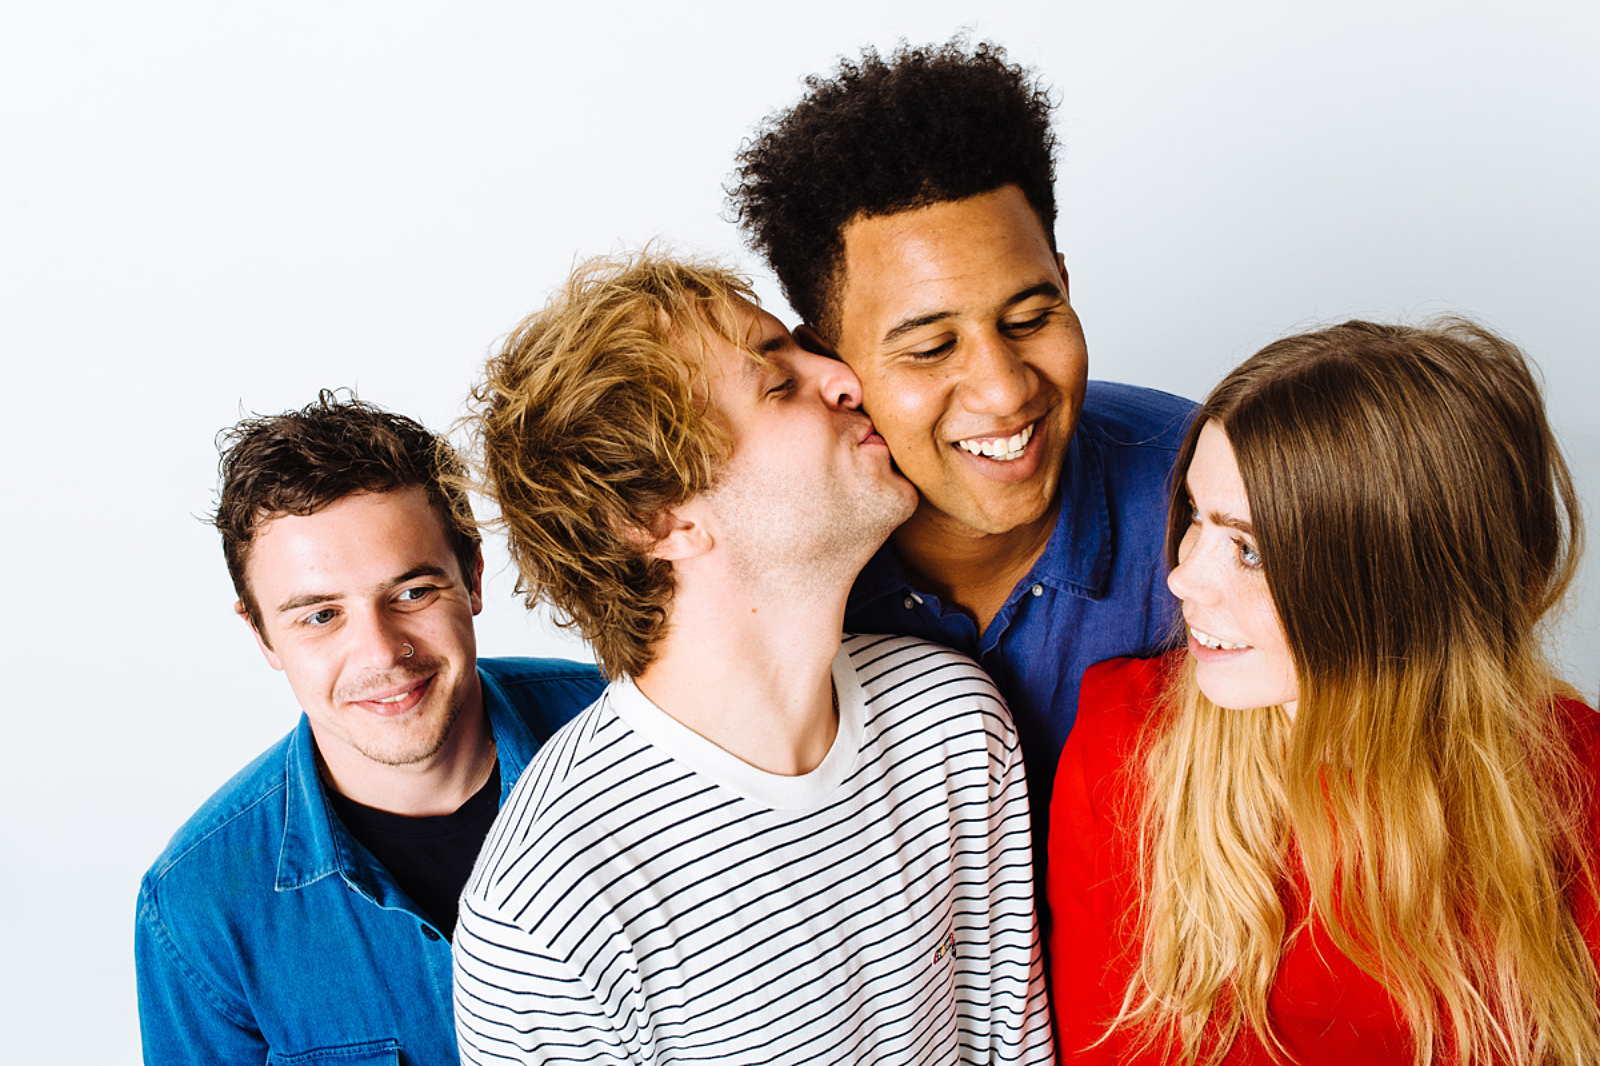 Tracks: Superfood, Aphex Twin, Kindness & more